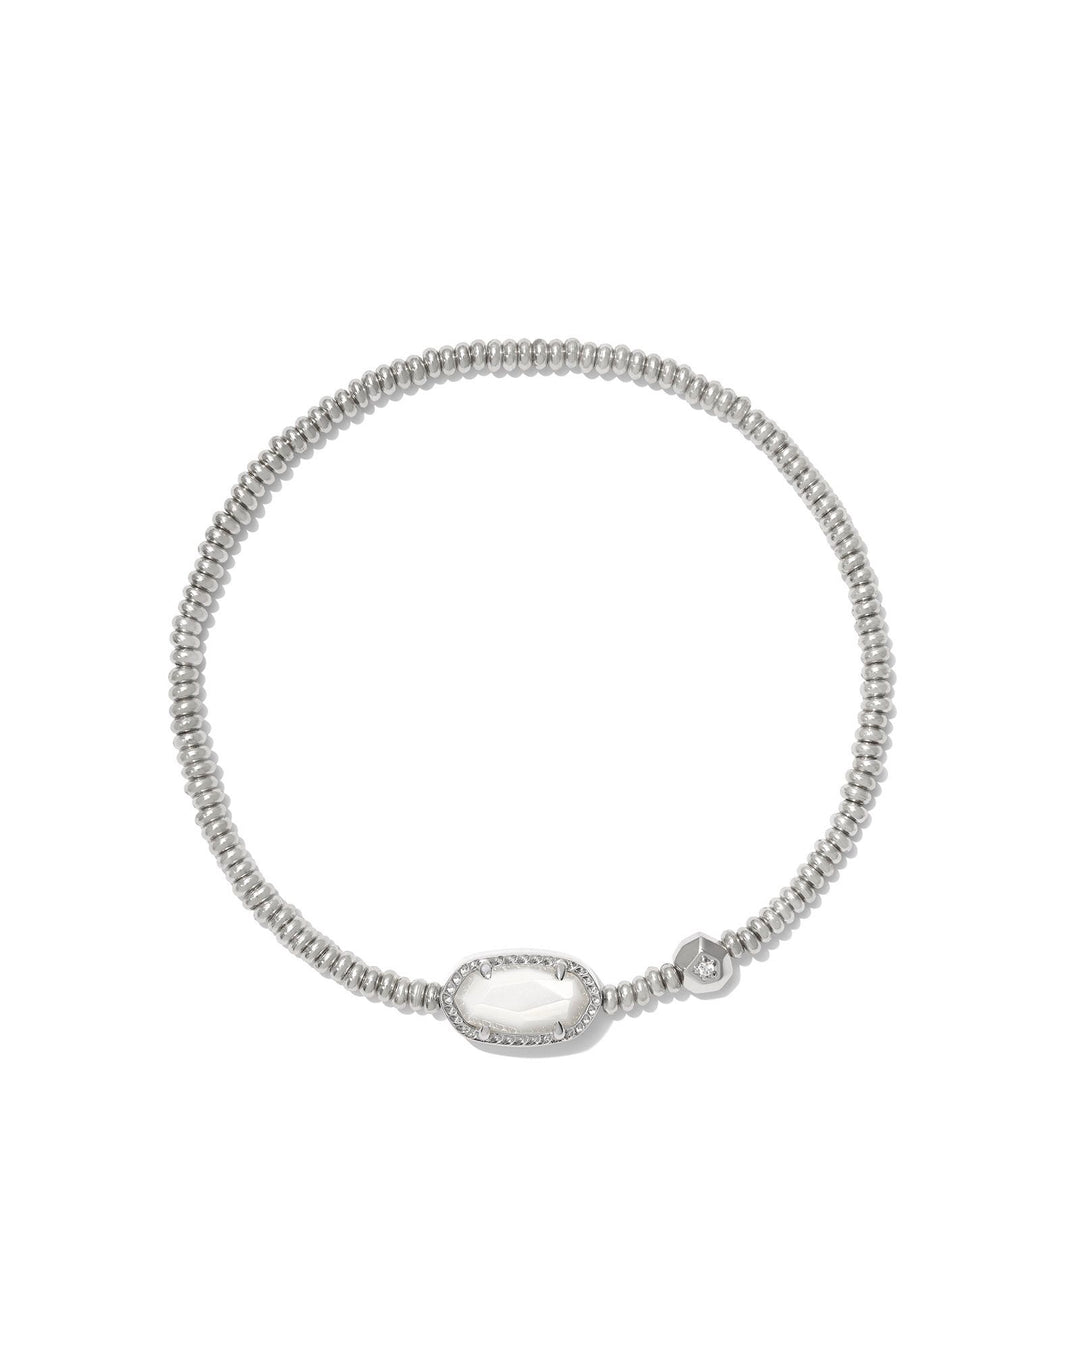 GRAYSON STRETCH BRACELET, SILVER WHITE MOTHER OF PEARL